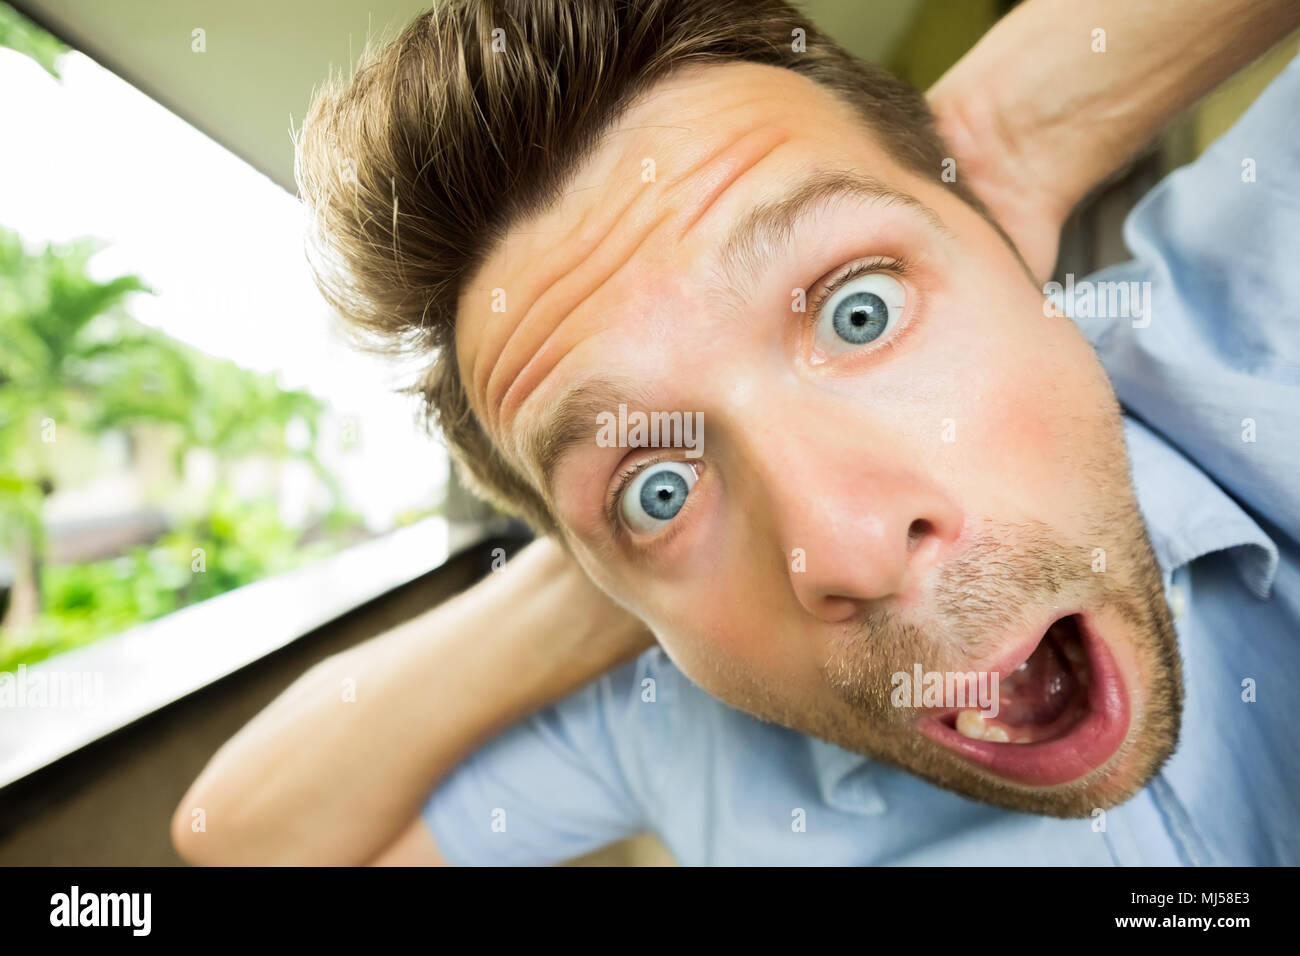 Panic man is shocked. His face is close to camera. He is opening his mouth in surprise Stock Photo